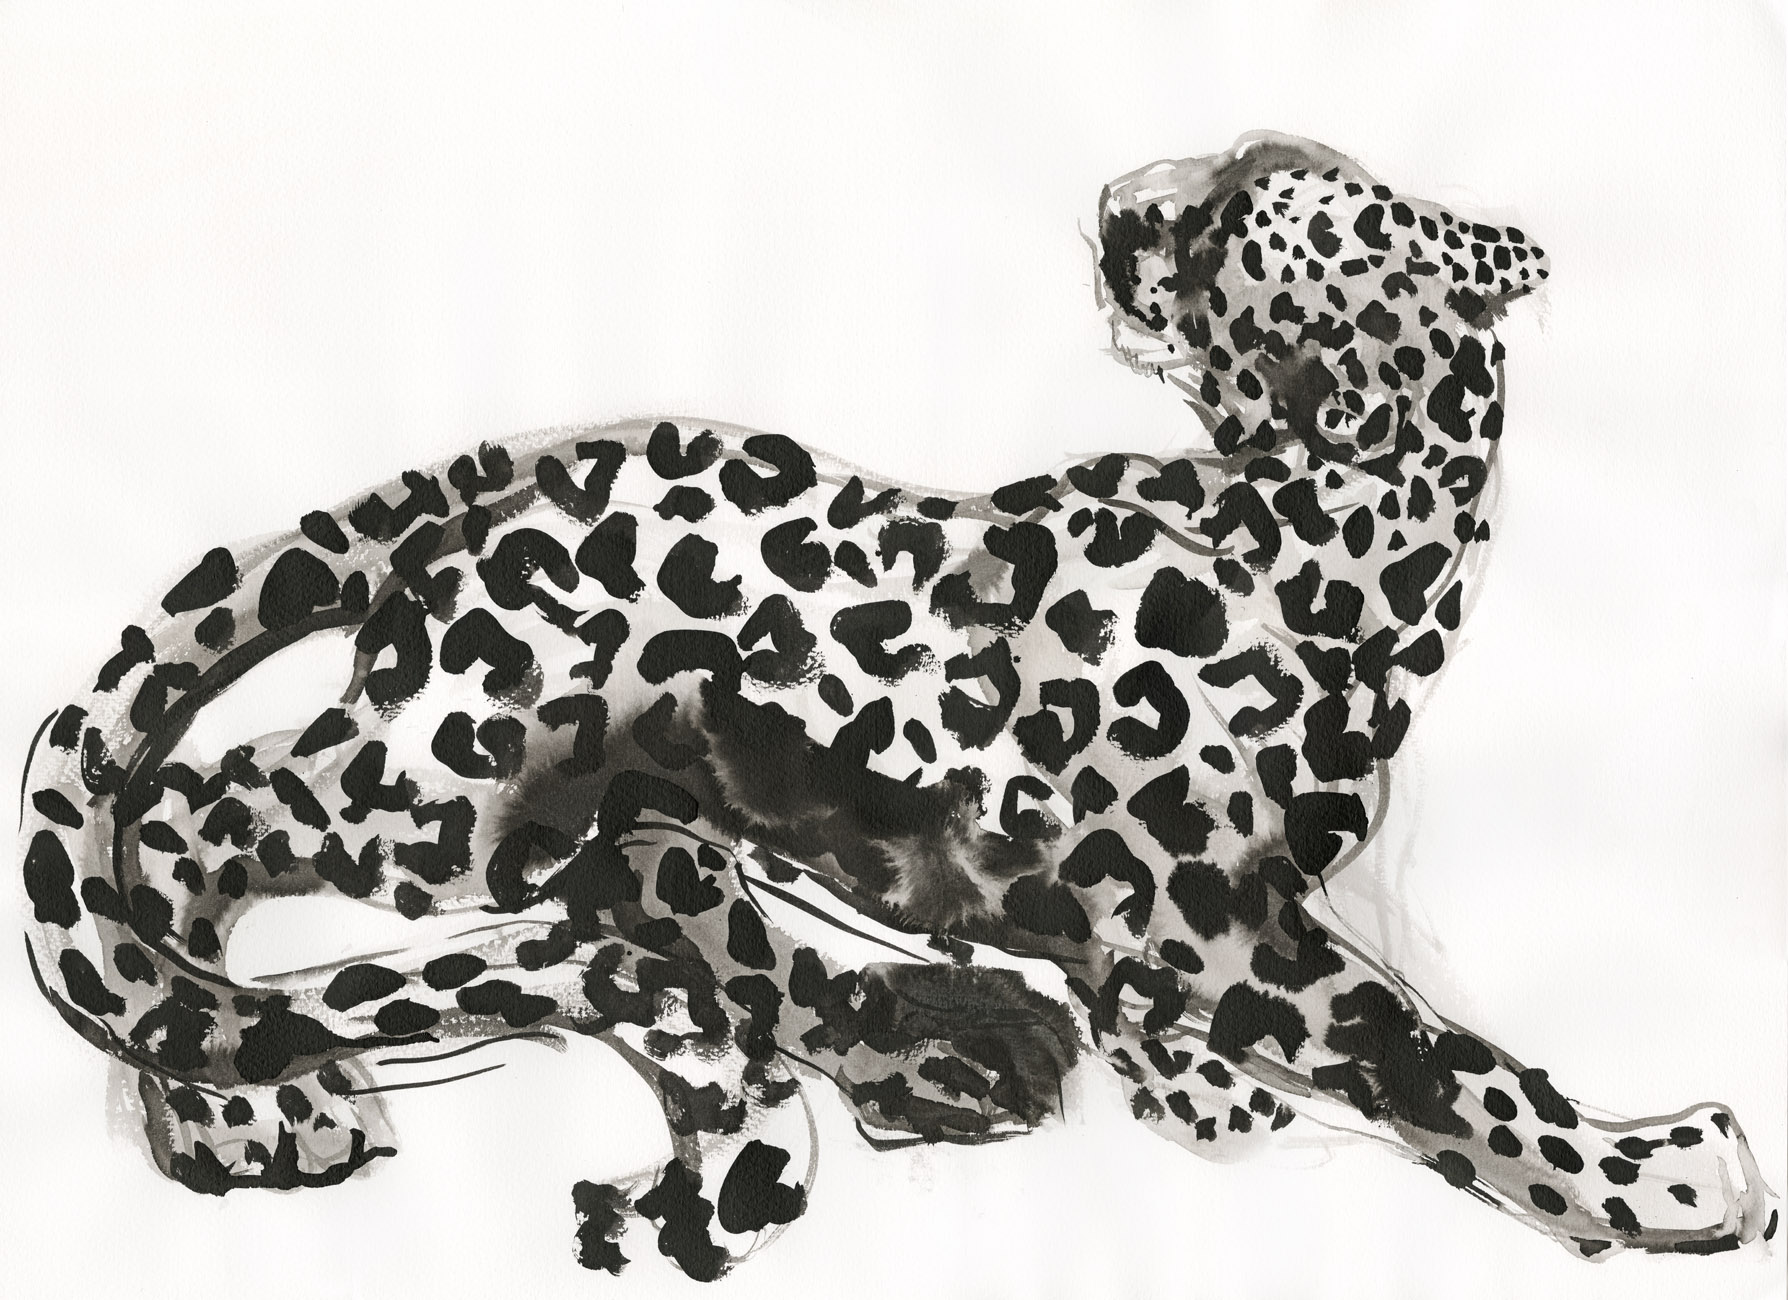 'The Leopard' by Alice Shirley